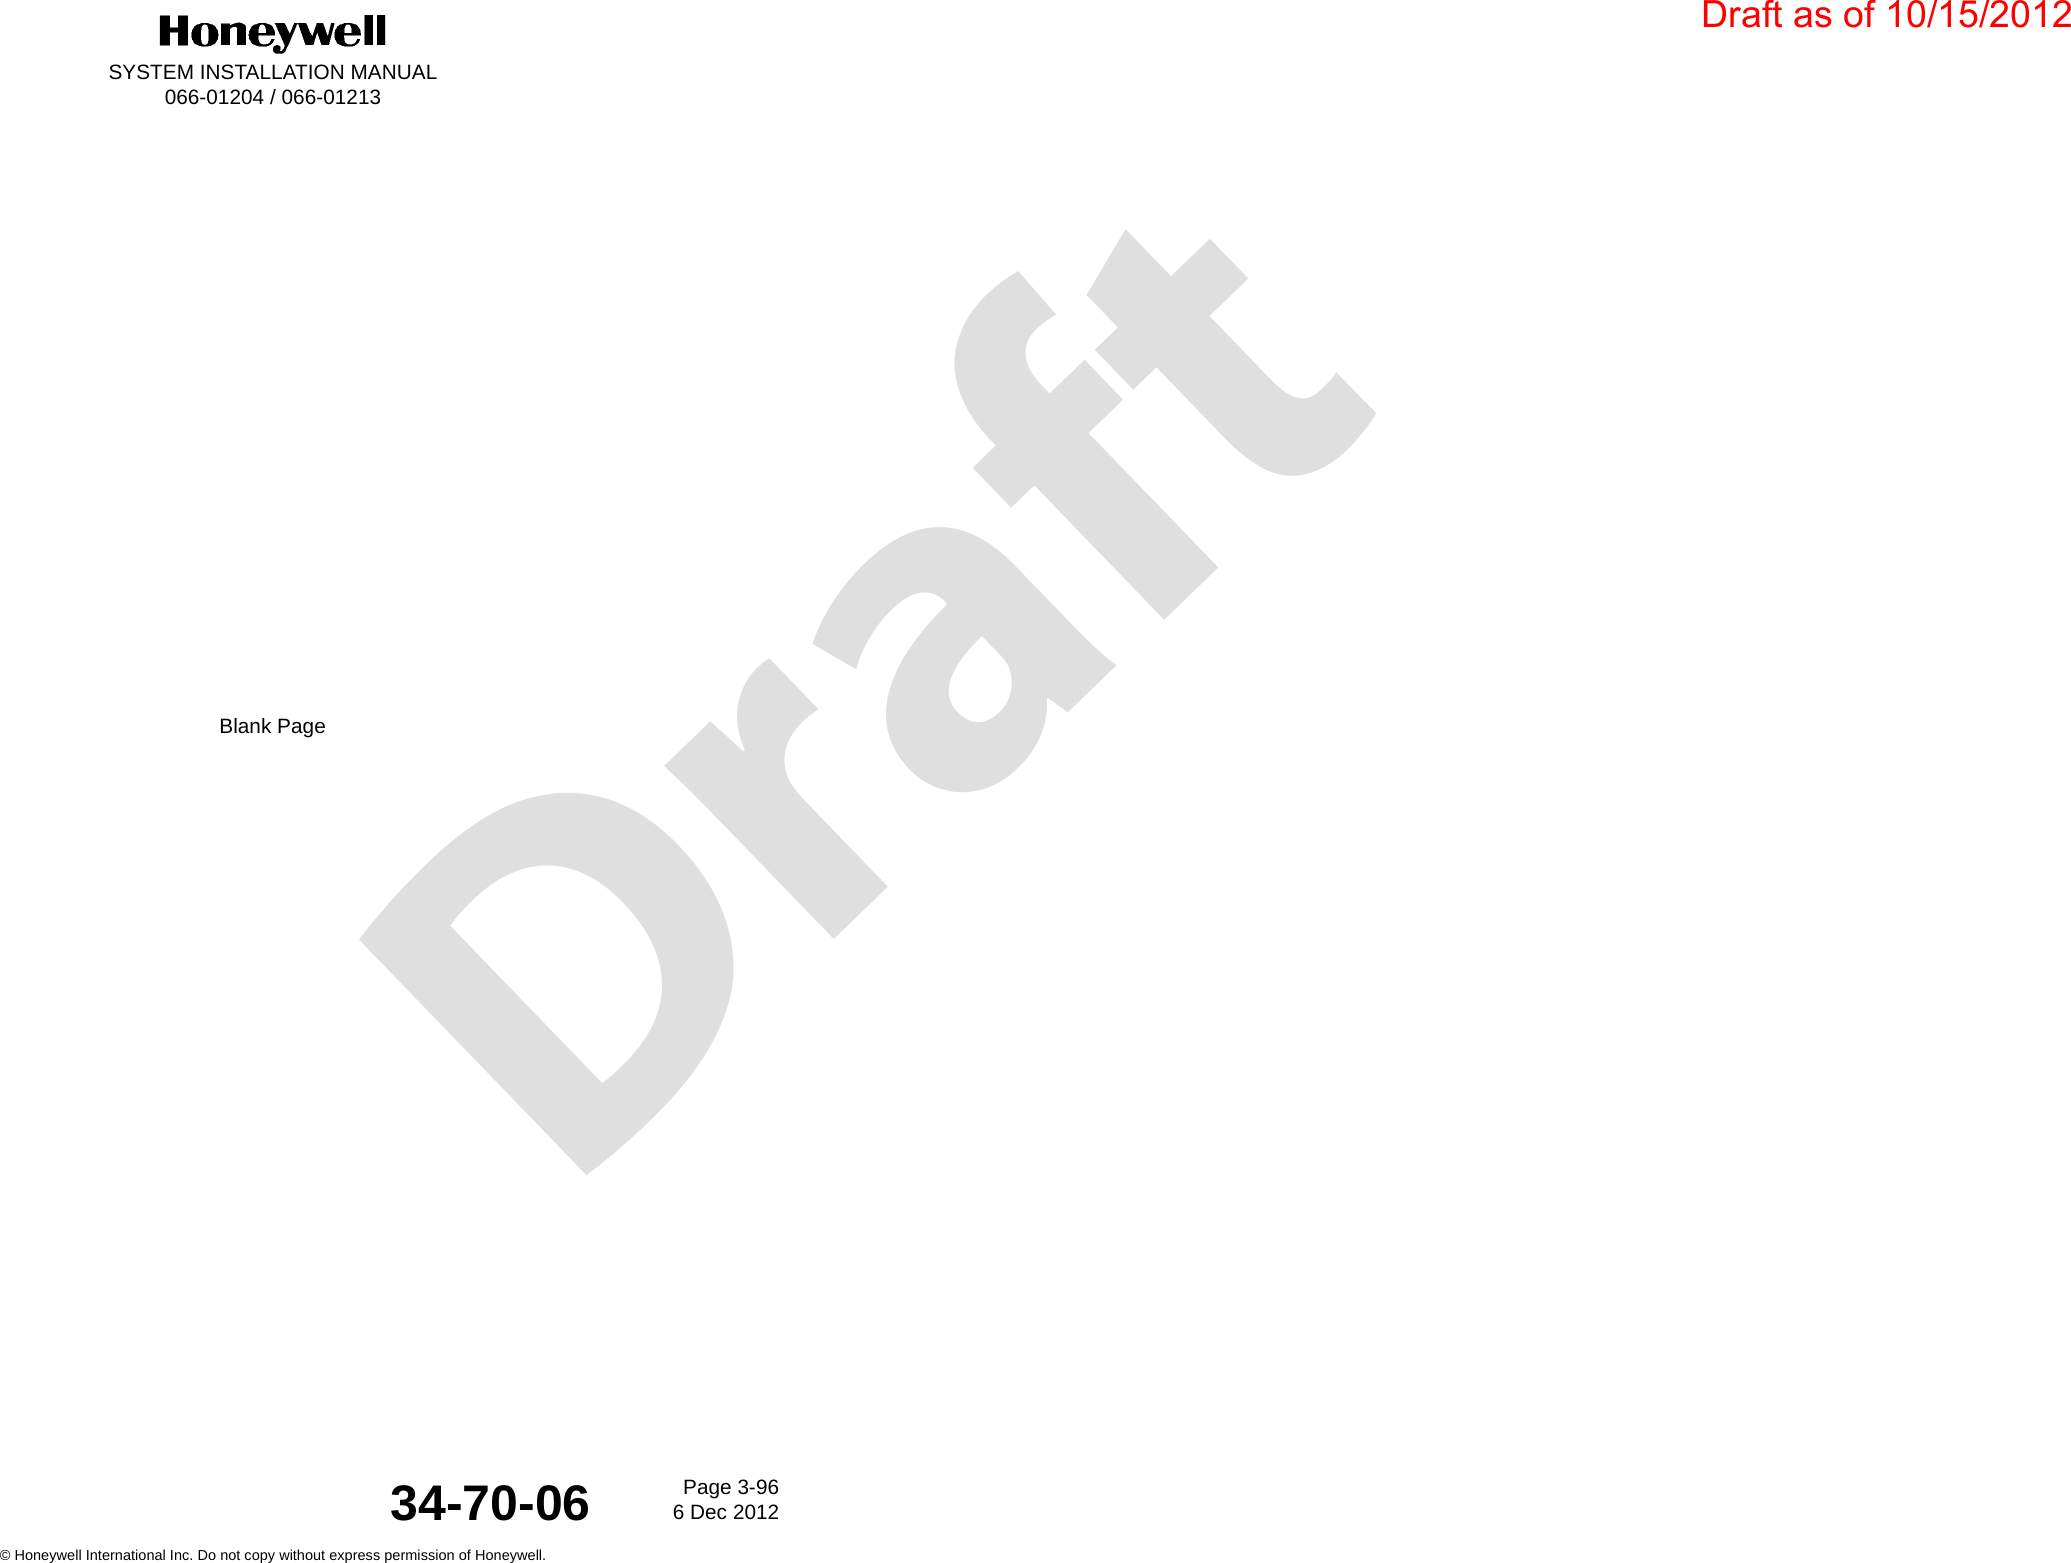 DraftSYSTEM INSTALLATION MANUAL066-01204 / 066-01213Page 3-966 Dec 2012© Honeywell International Inc. Do not copy without express permission of Honeywell.34-70-06Blank PageDraft as of 10/15/2012